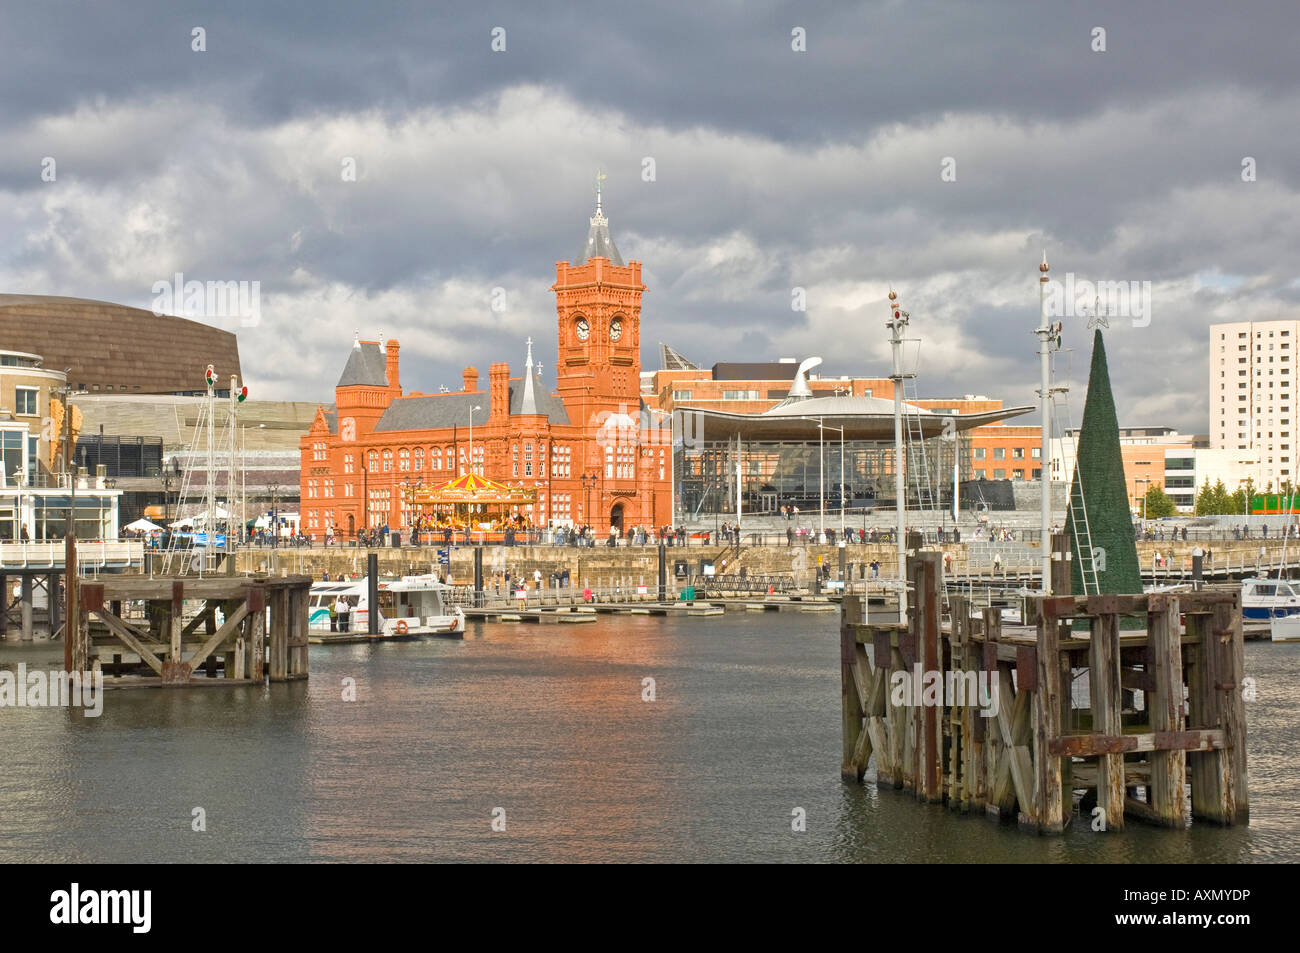 Central area of Cardiff Bay (Mermaid Quay) - a regenerated commercialised area south of Cardiff with the Pierhead Building. Stock Photo